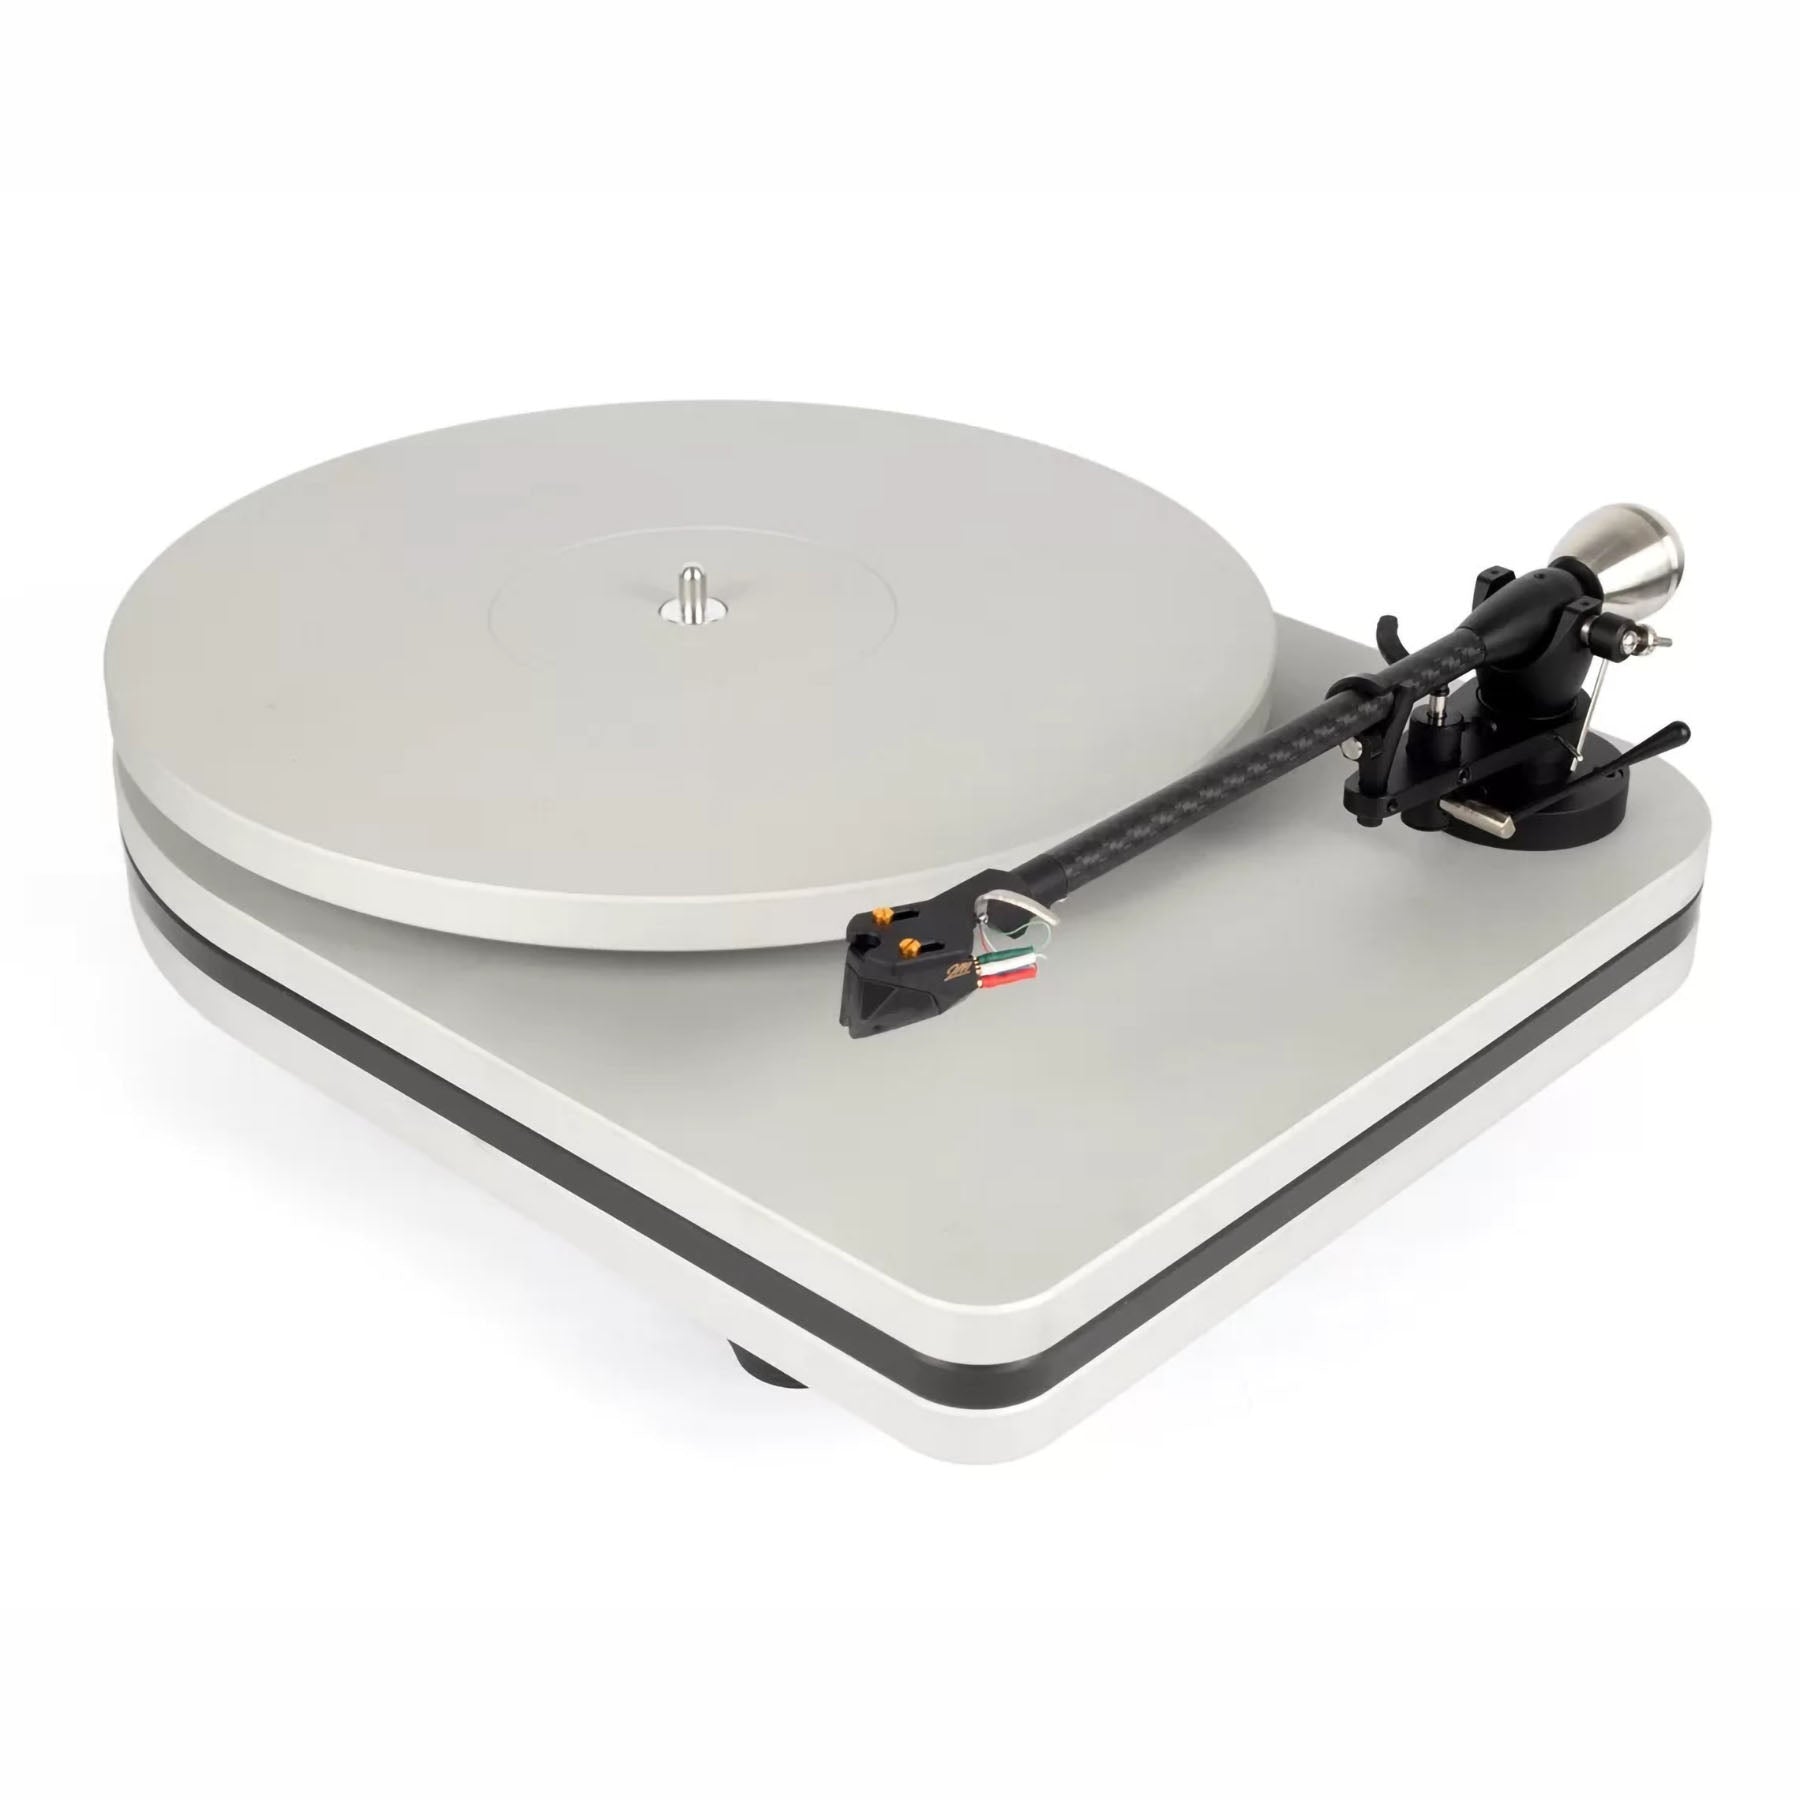 AURIS Bayadere 3 Turntable with W9 Tonearm